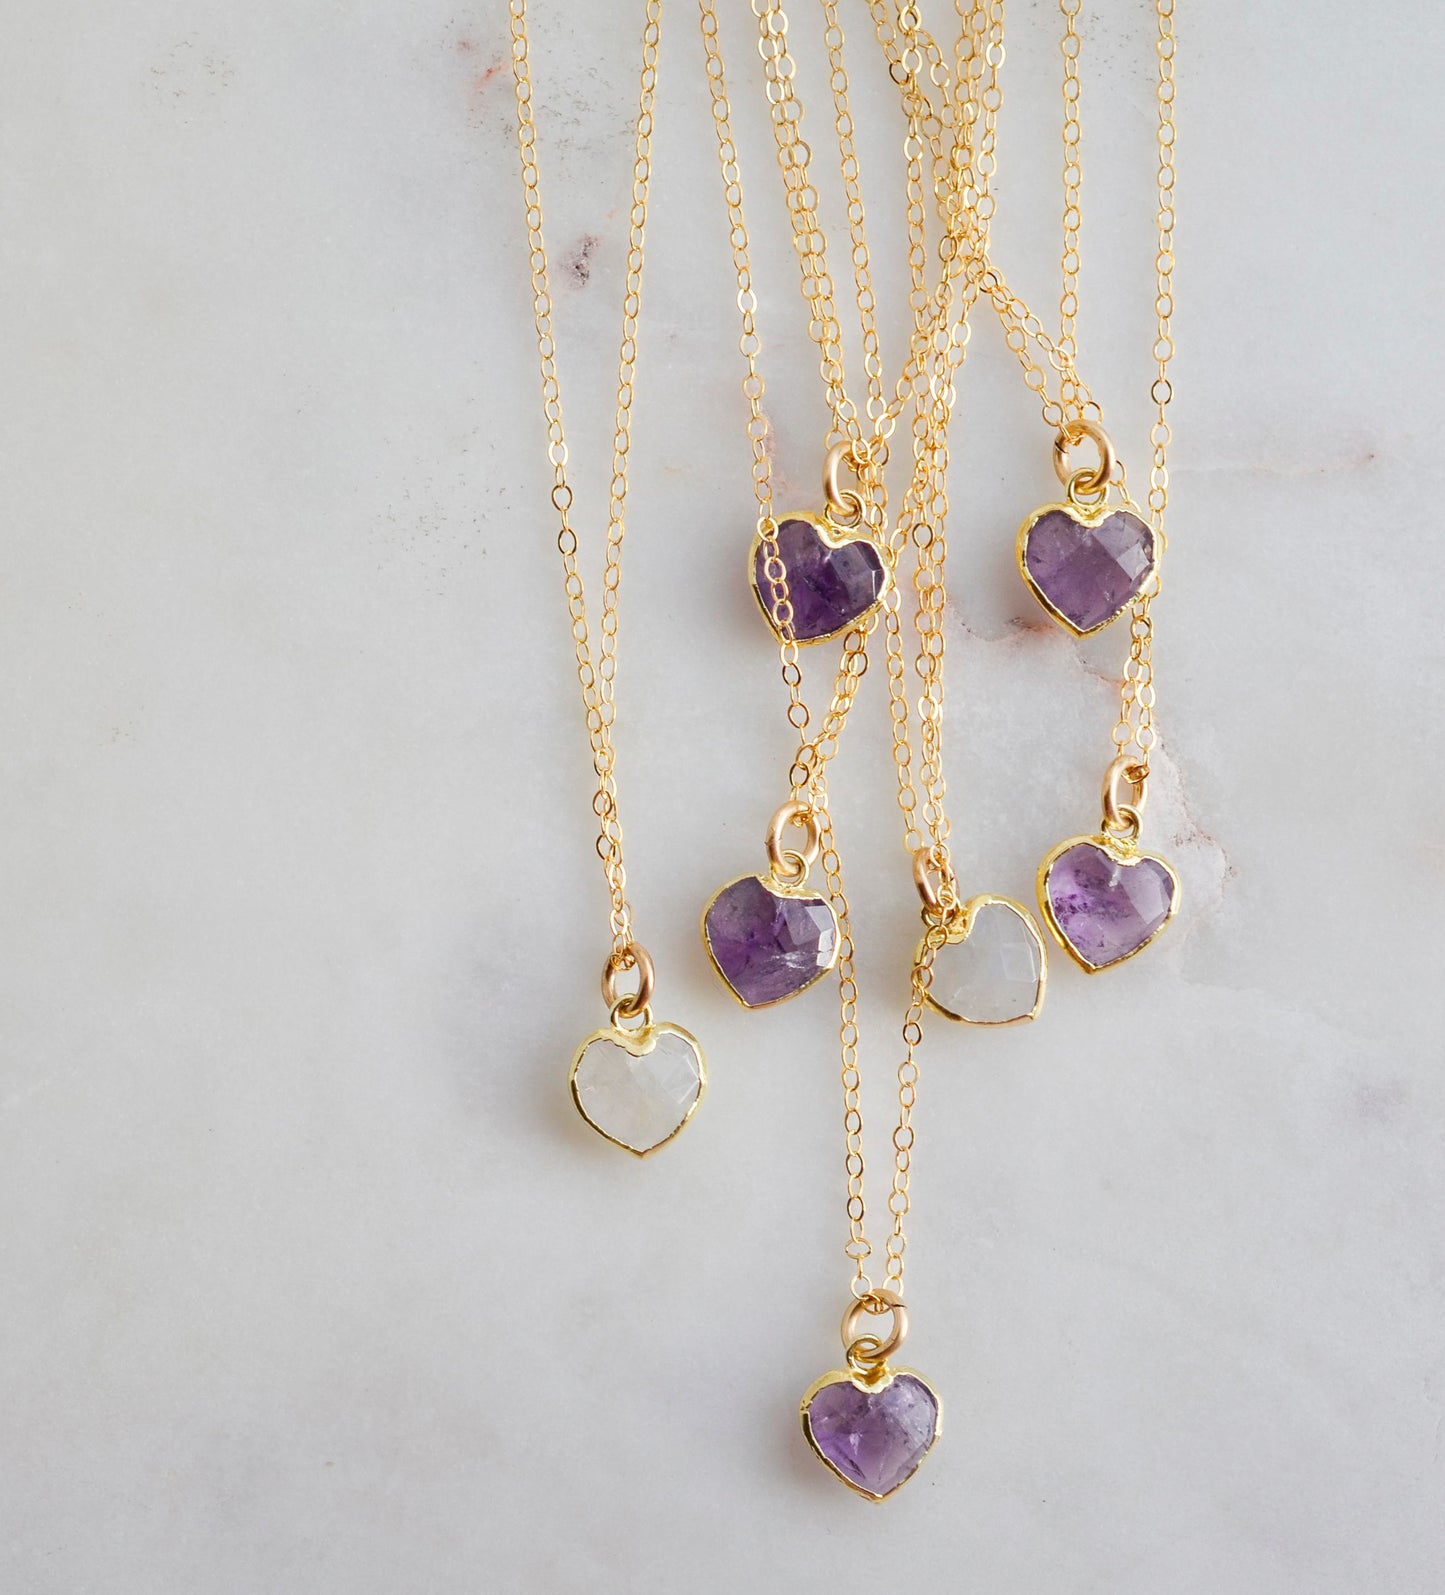 Amethyst Heart Pendant in 14k Gold Filled or Sterling Silver